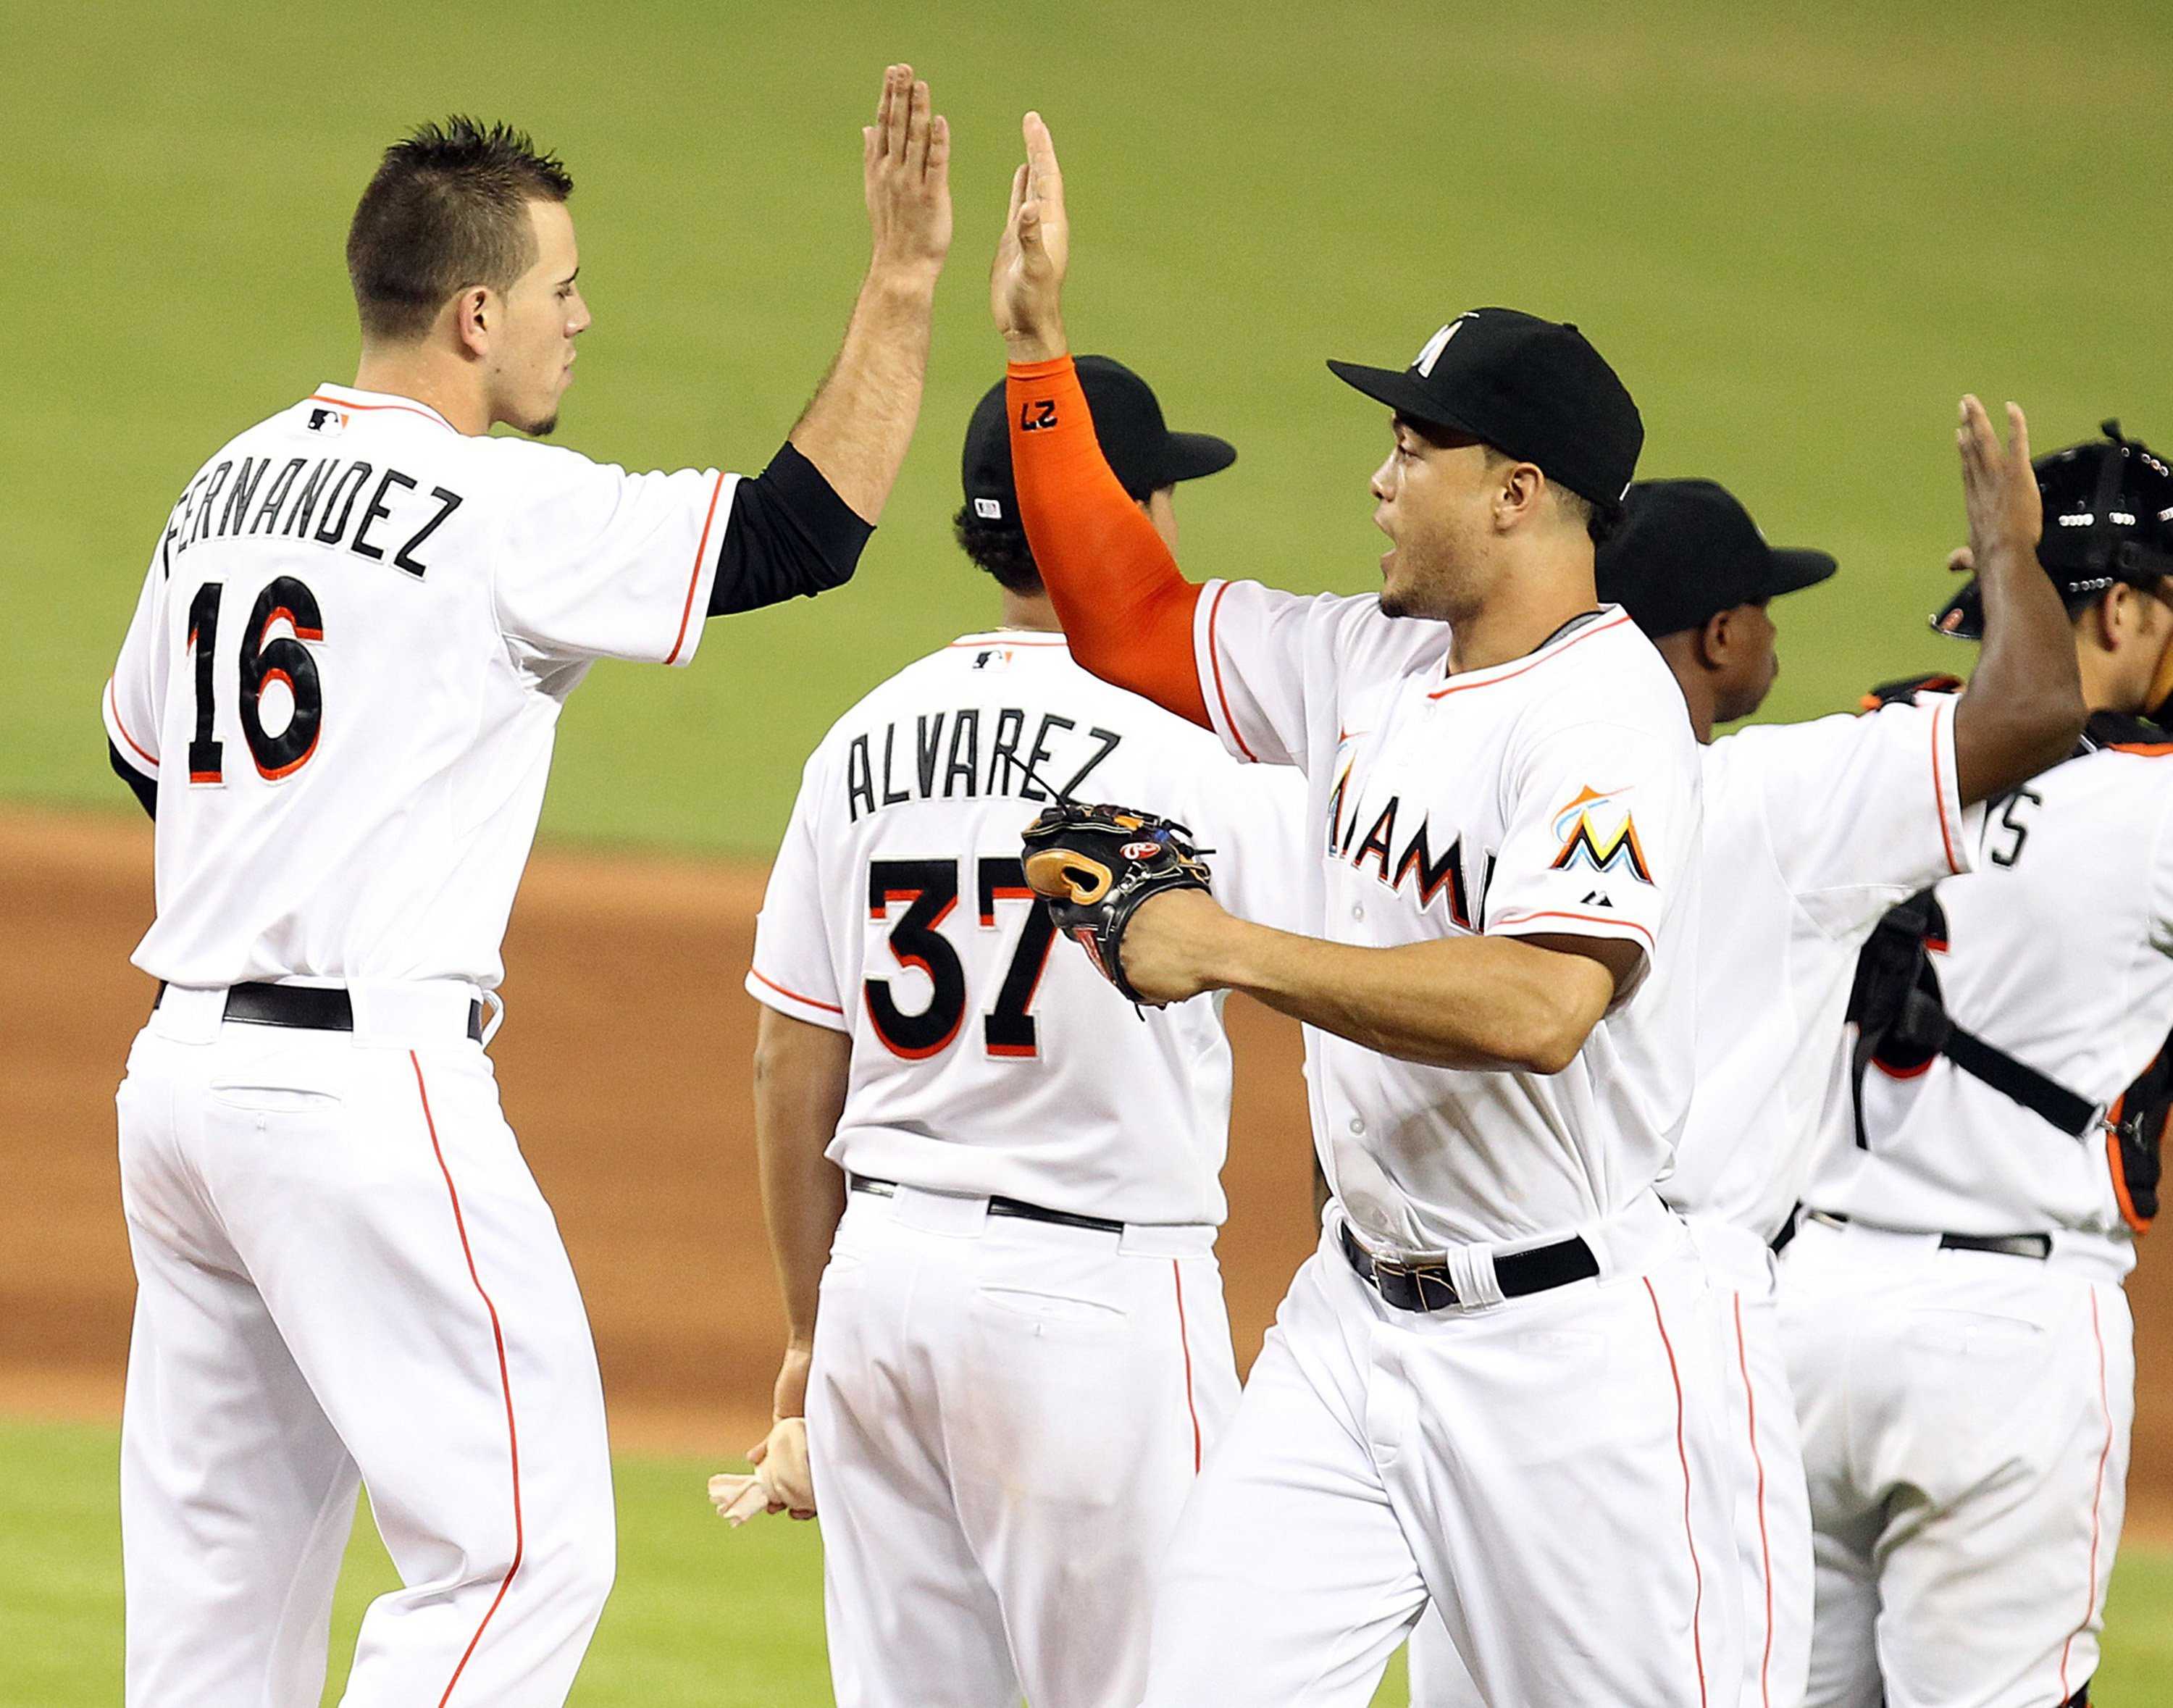 Miami+baseball+players+high-five+one+another